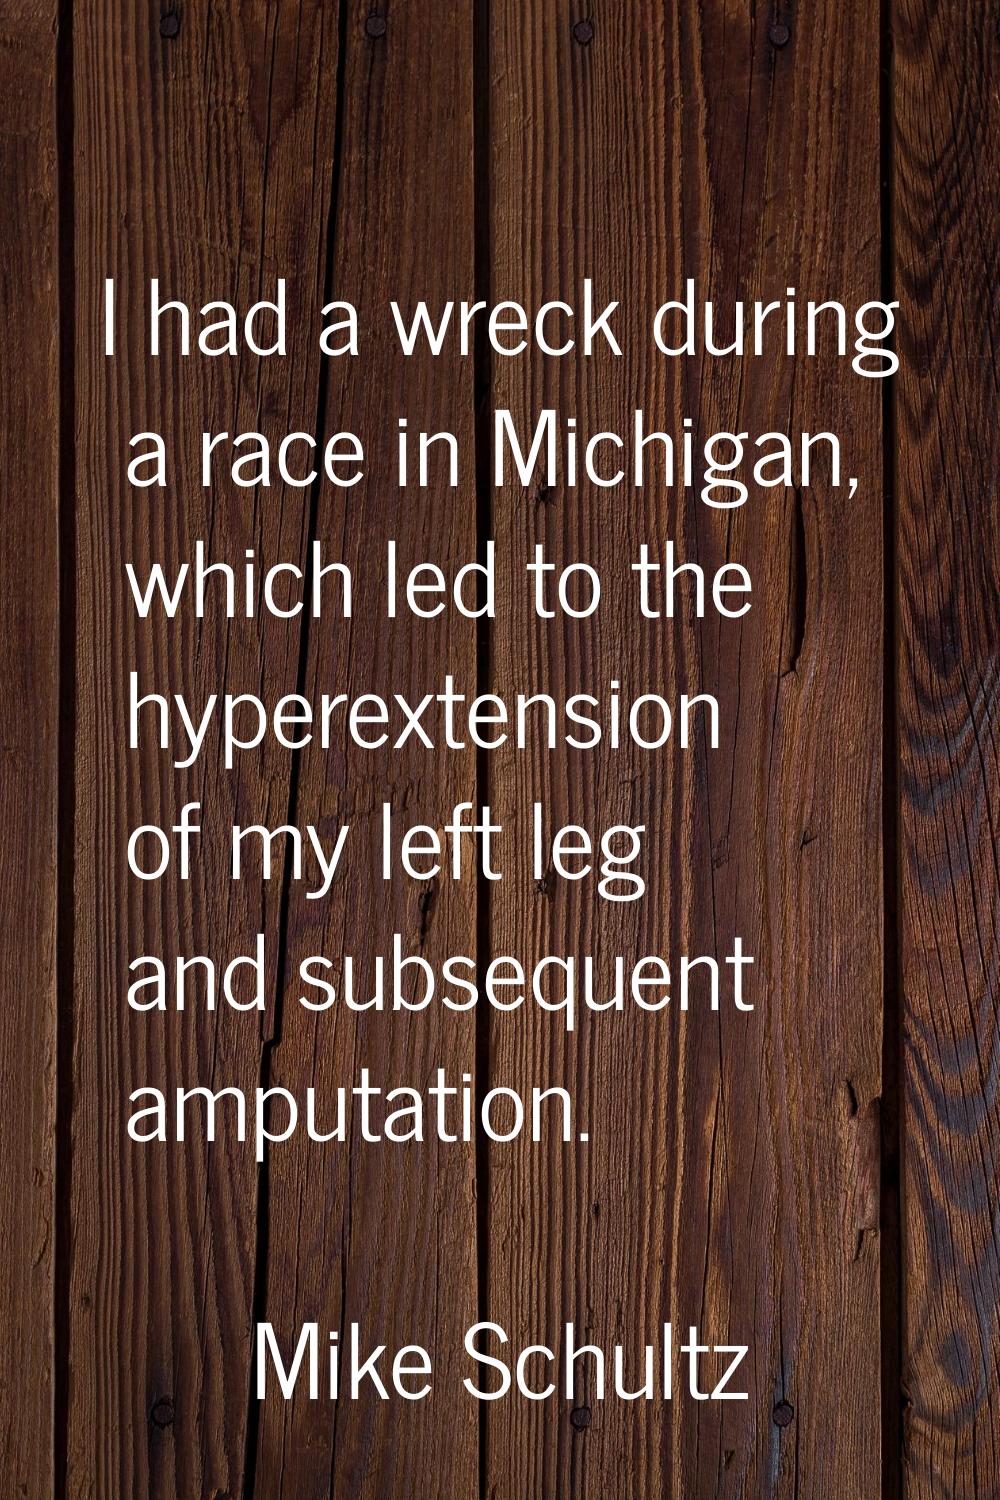 I had a wreck during a race in Michigan, which led to the hyperextension of my left leg and subsequ